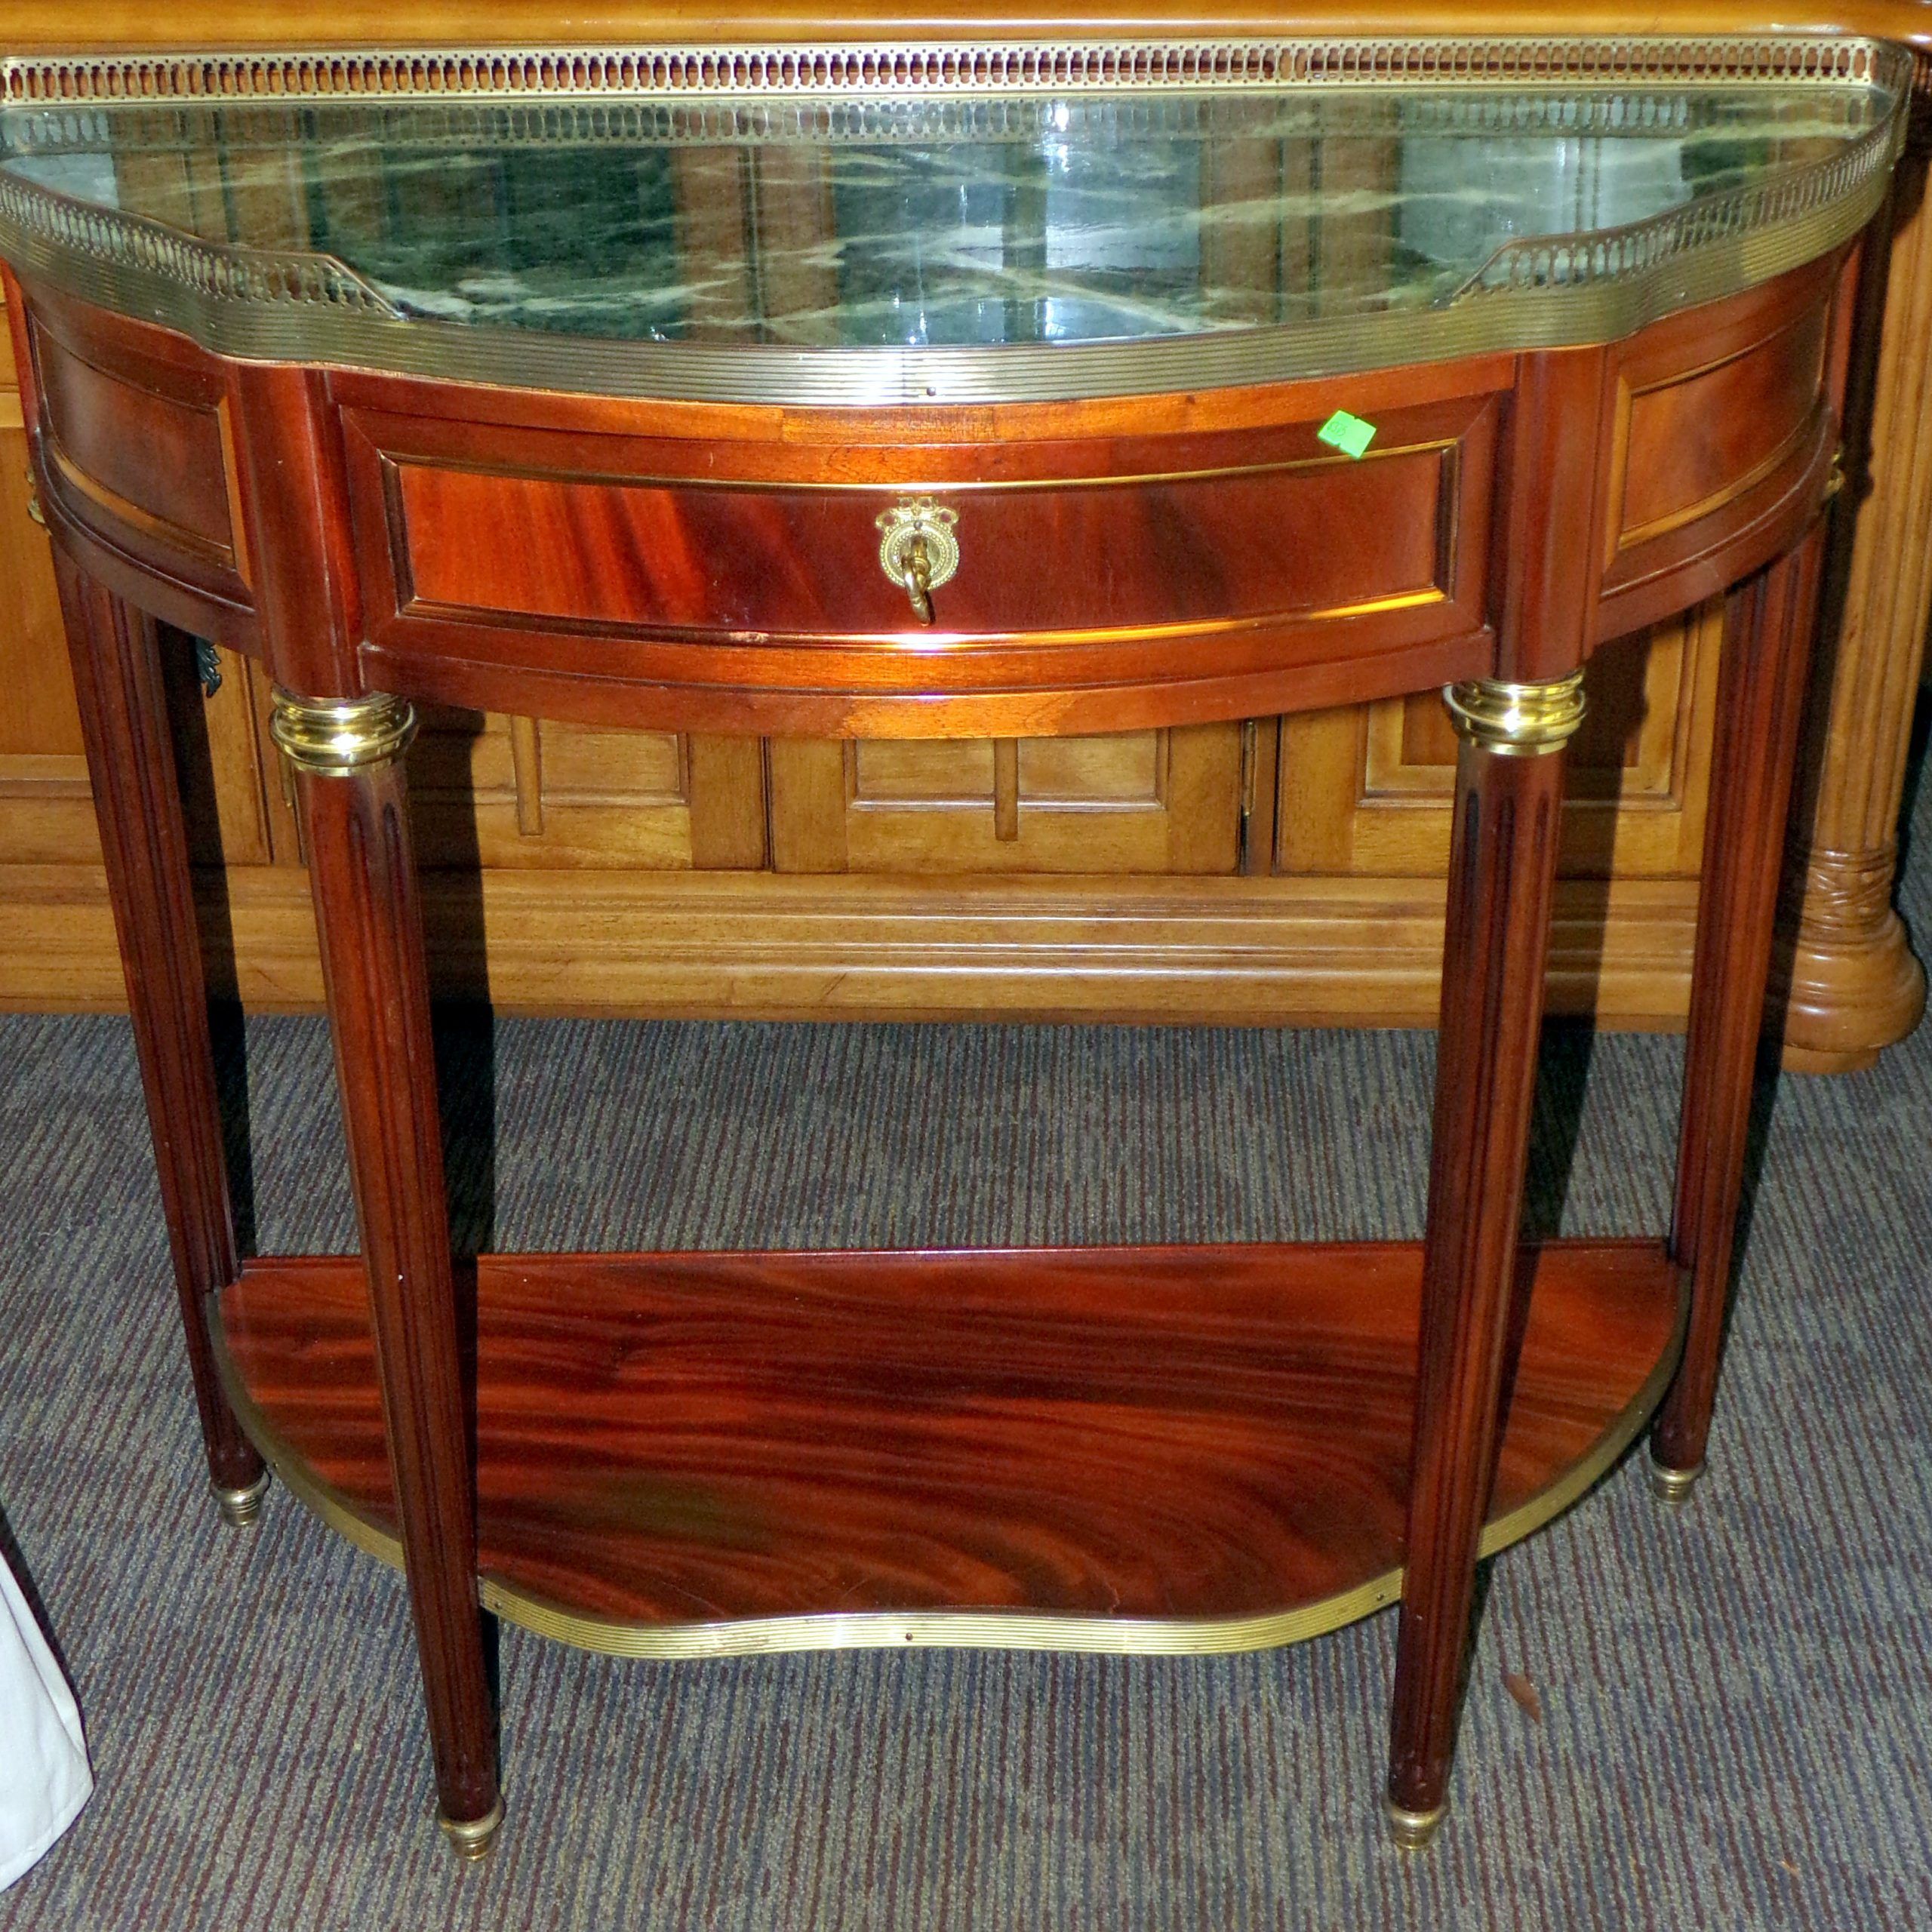 Demilune Green Marble Top Classic Console Foyer Sofa Table Inside Marble Top Console Tables (View 9 of 20)